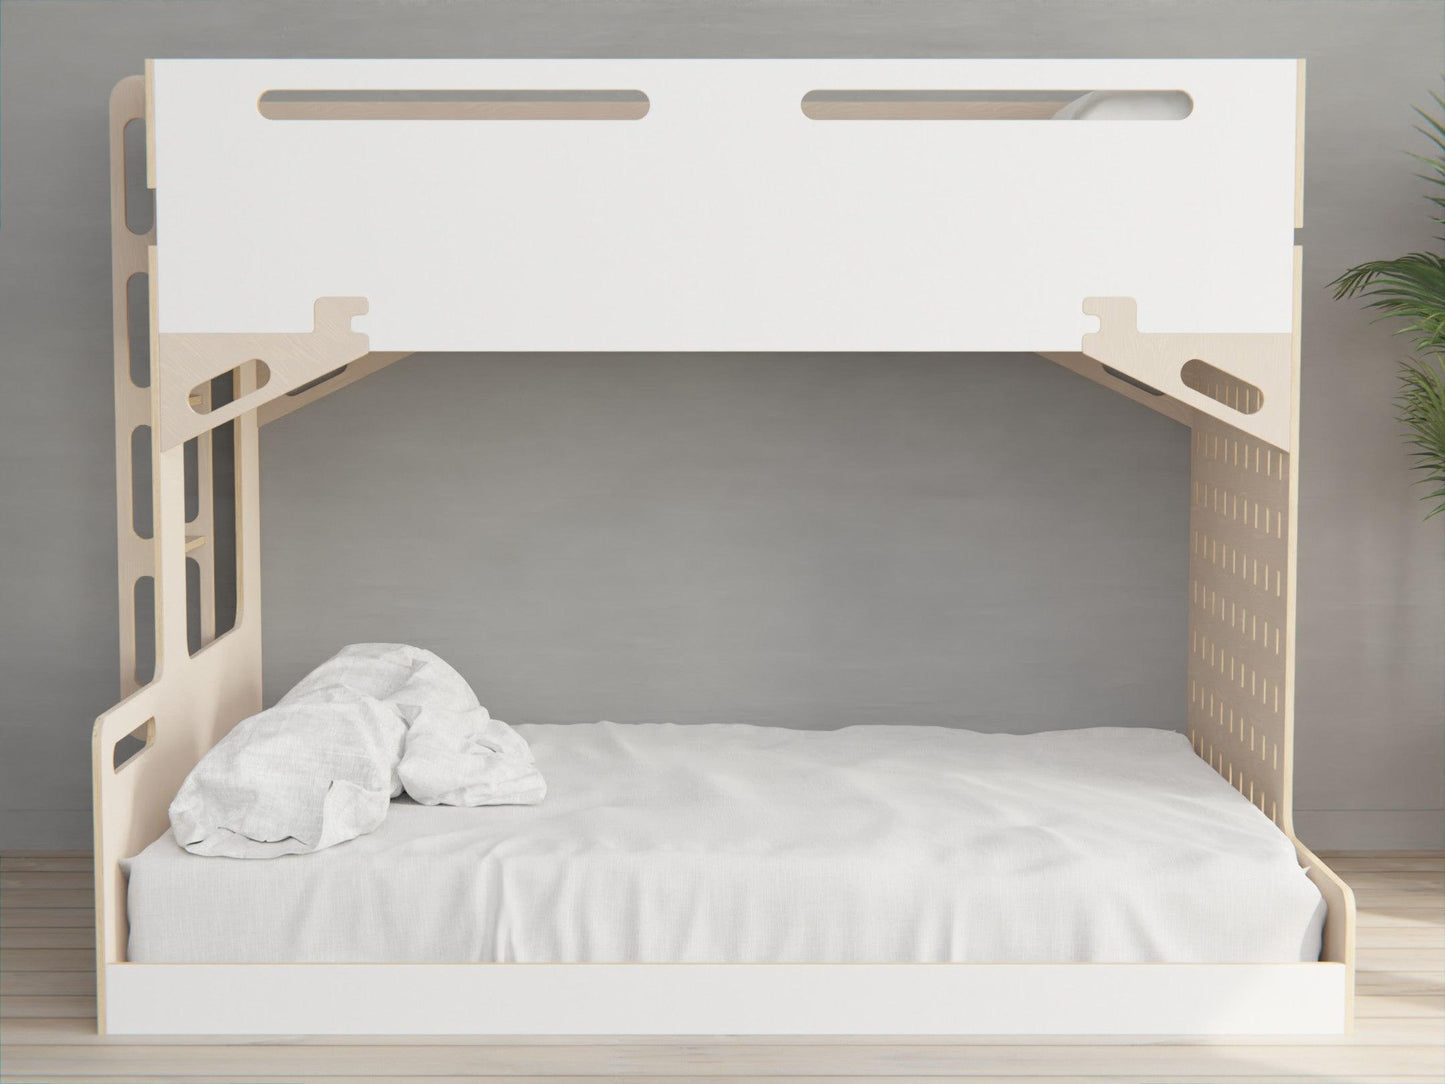 Our plywood triple bunk beds redefine efficient living. Perfect for accommodating family and friends in style.